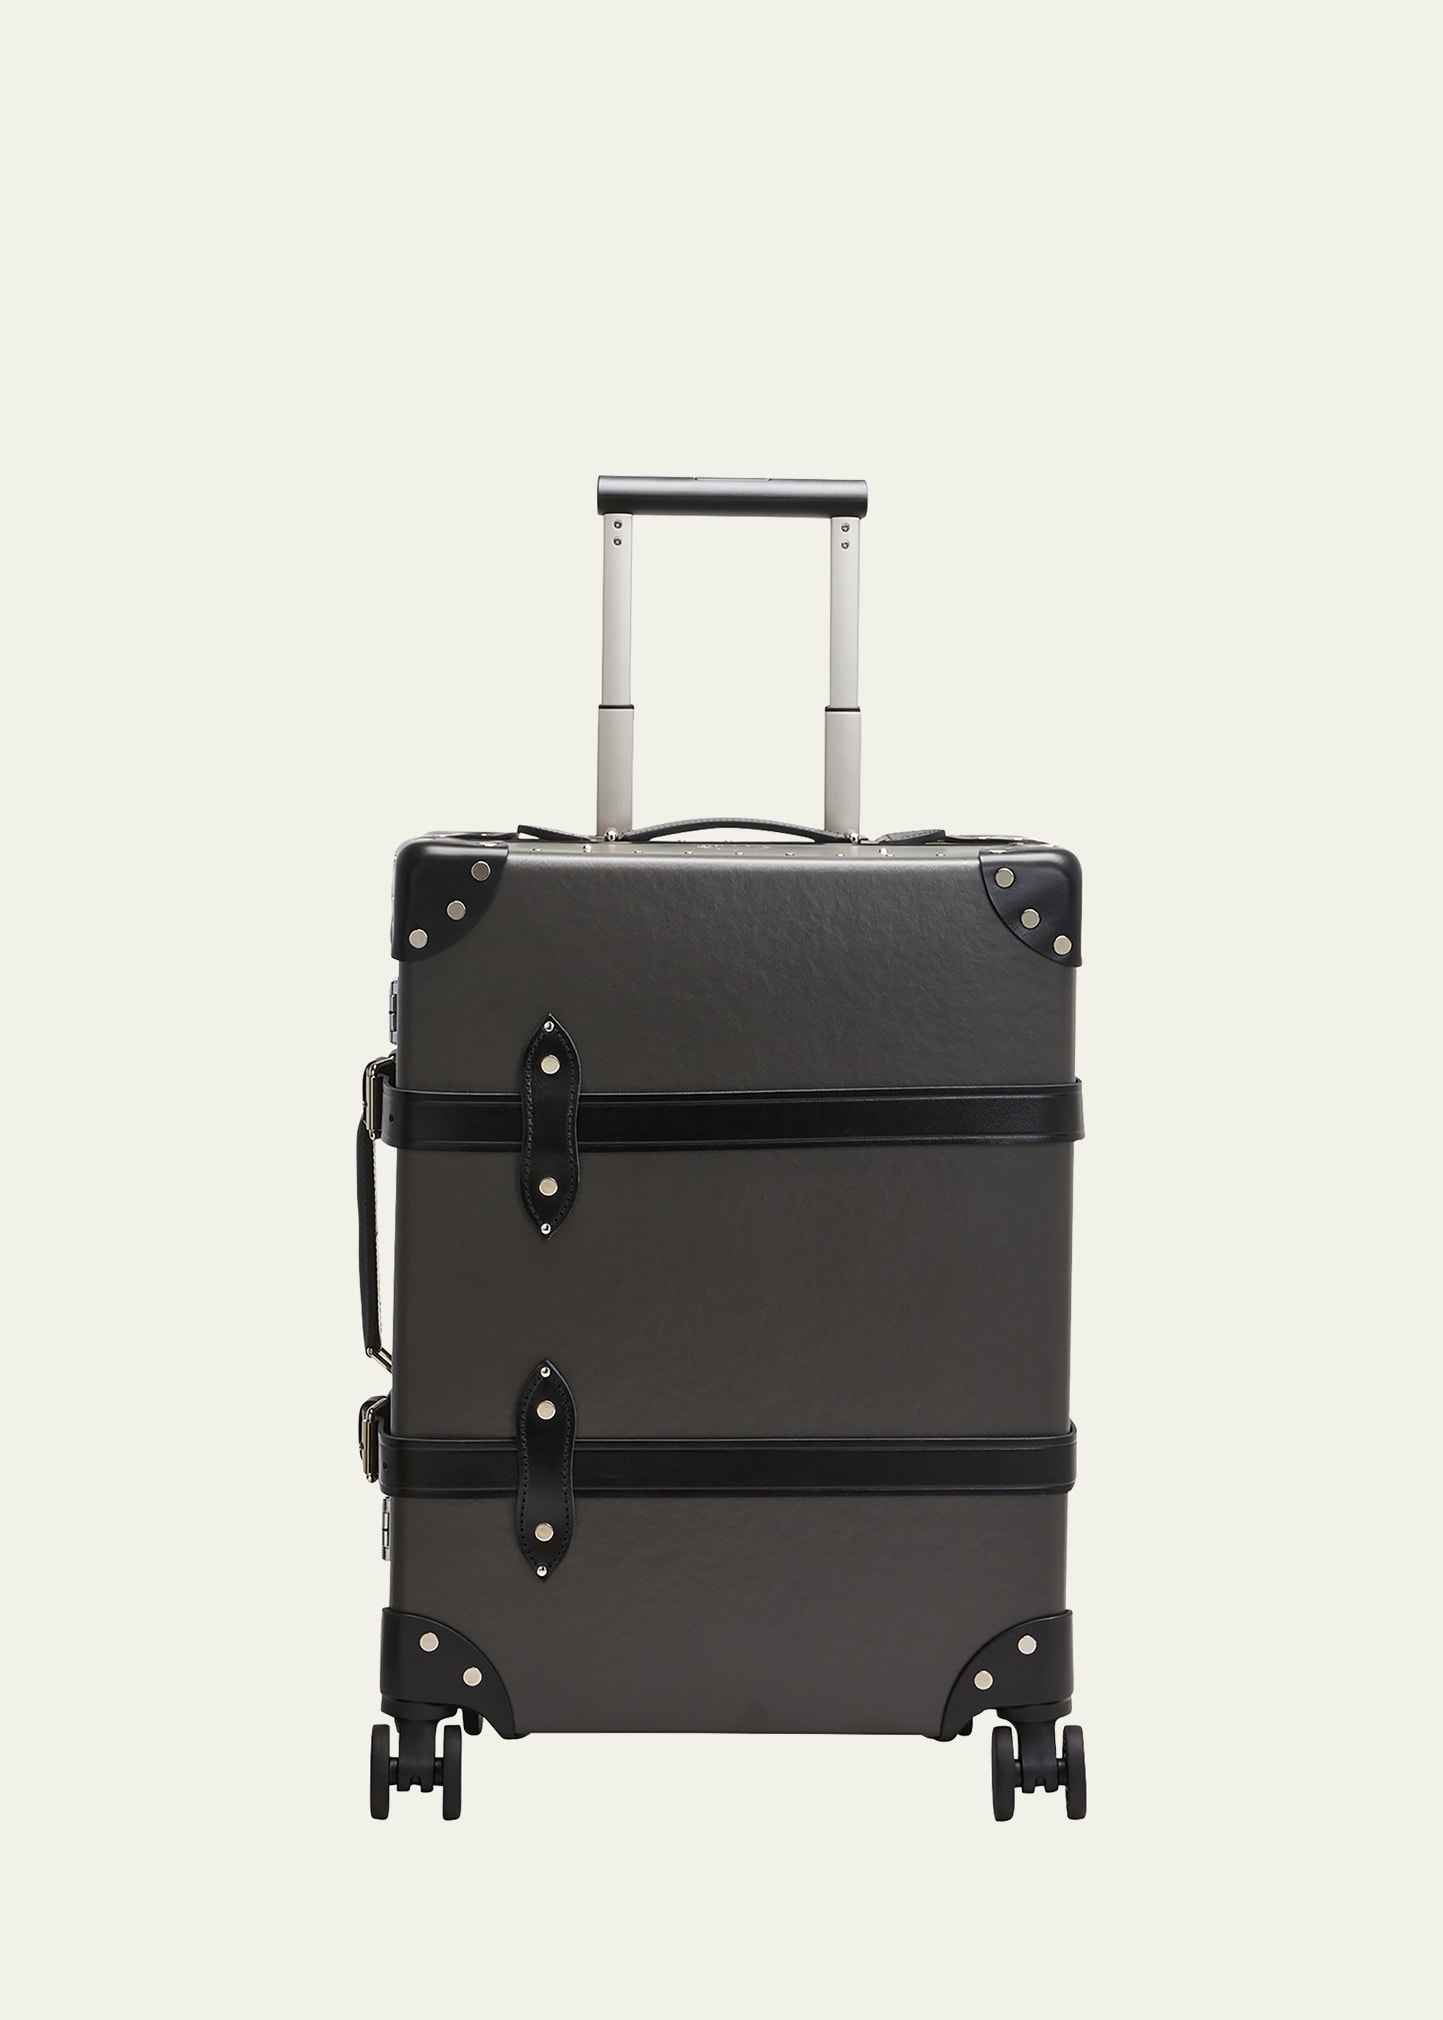 Globe Trotter Suitcase Centenary Carry-on Luggage In Grey Black